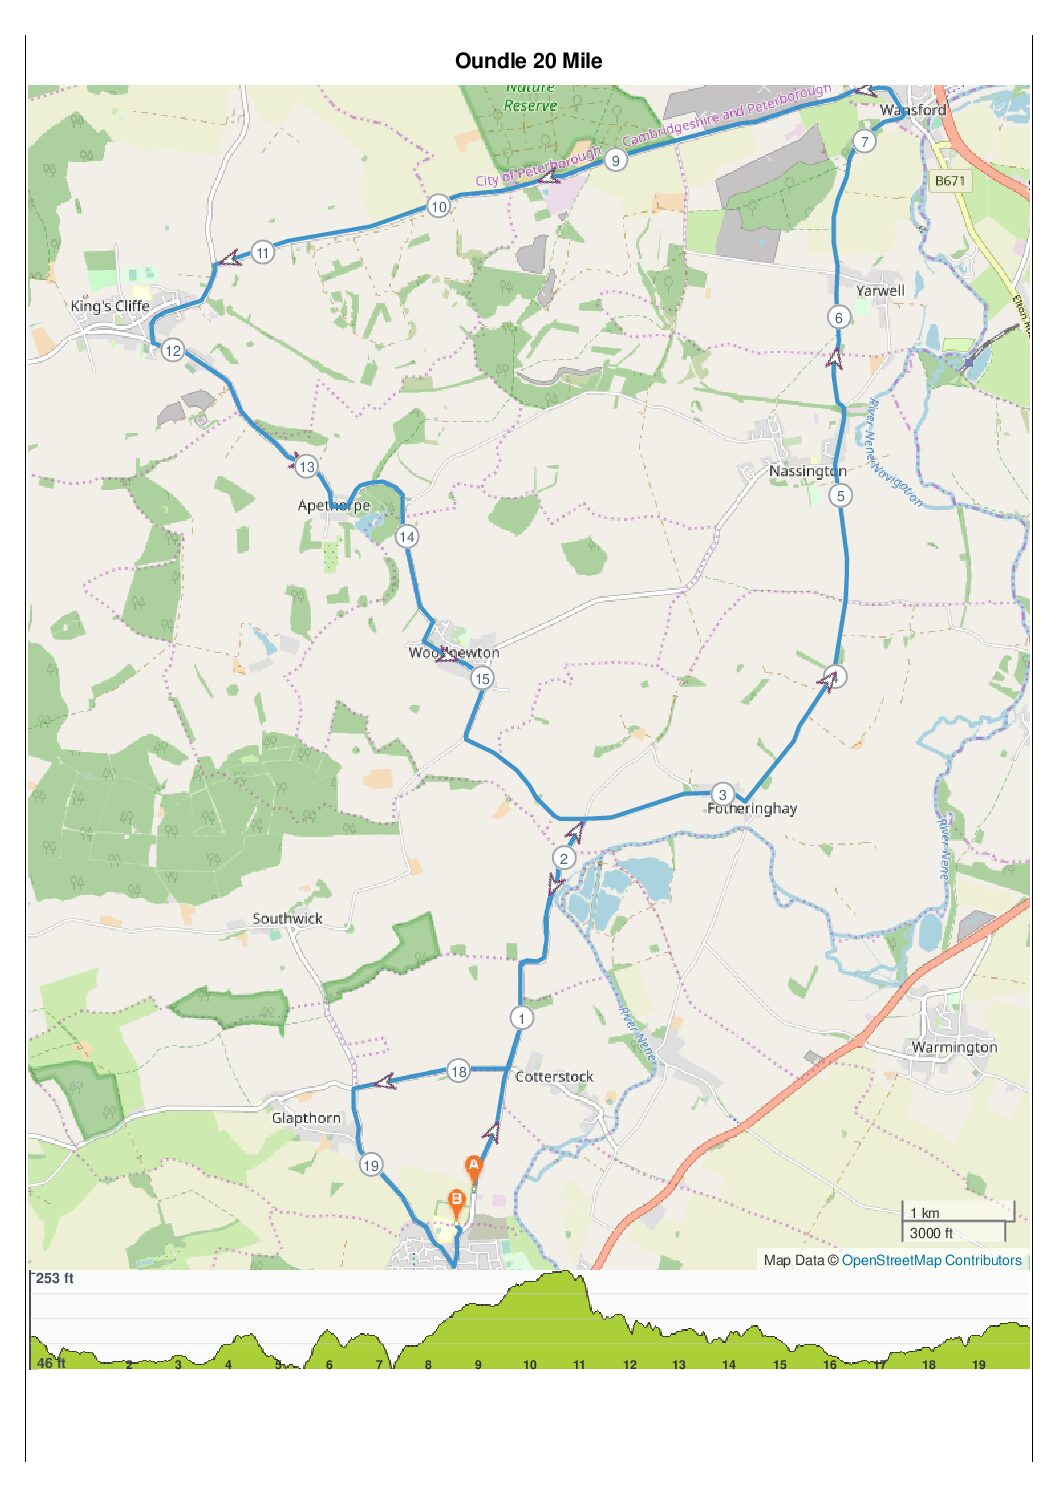 Notice of a running event:  The Oundle 20 Run on 5 March 2023 – some local road closures involved